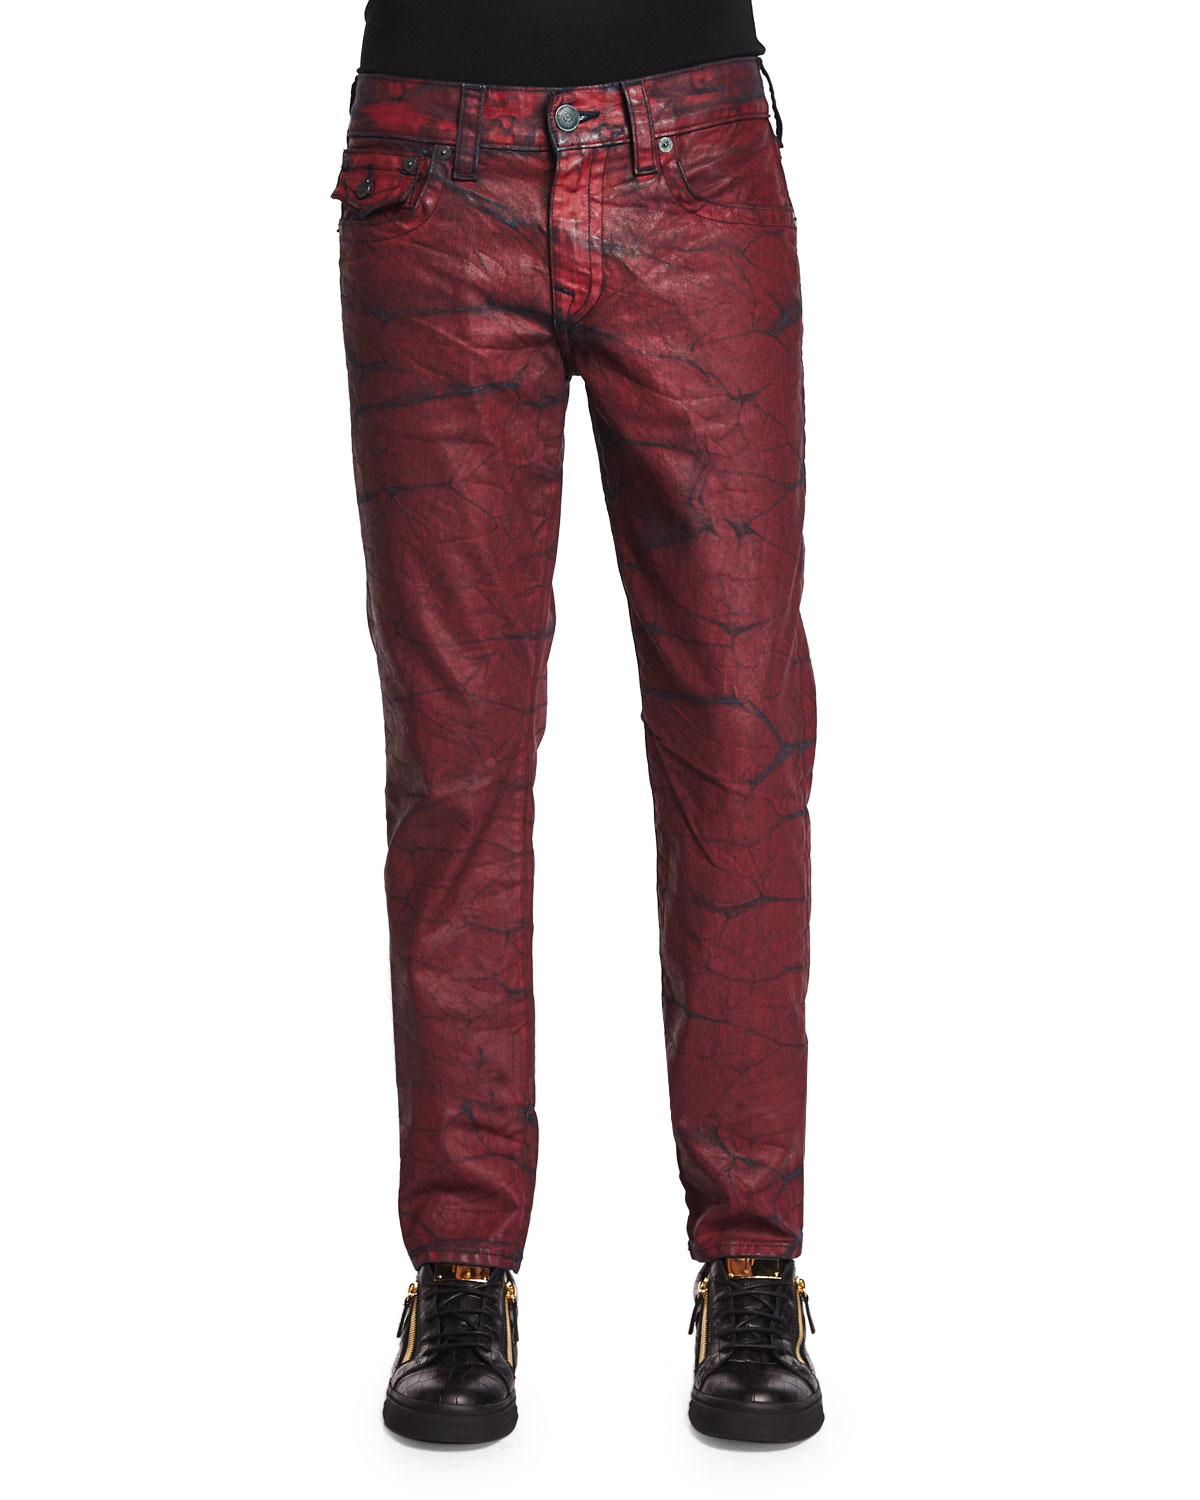 Lyst - True Religion Geno Rebel Crush Coated Jeans in Red for Men